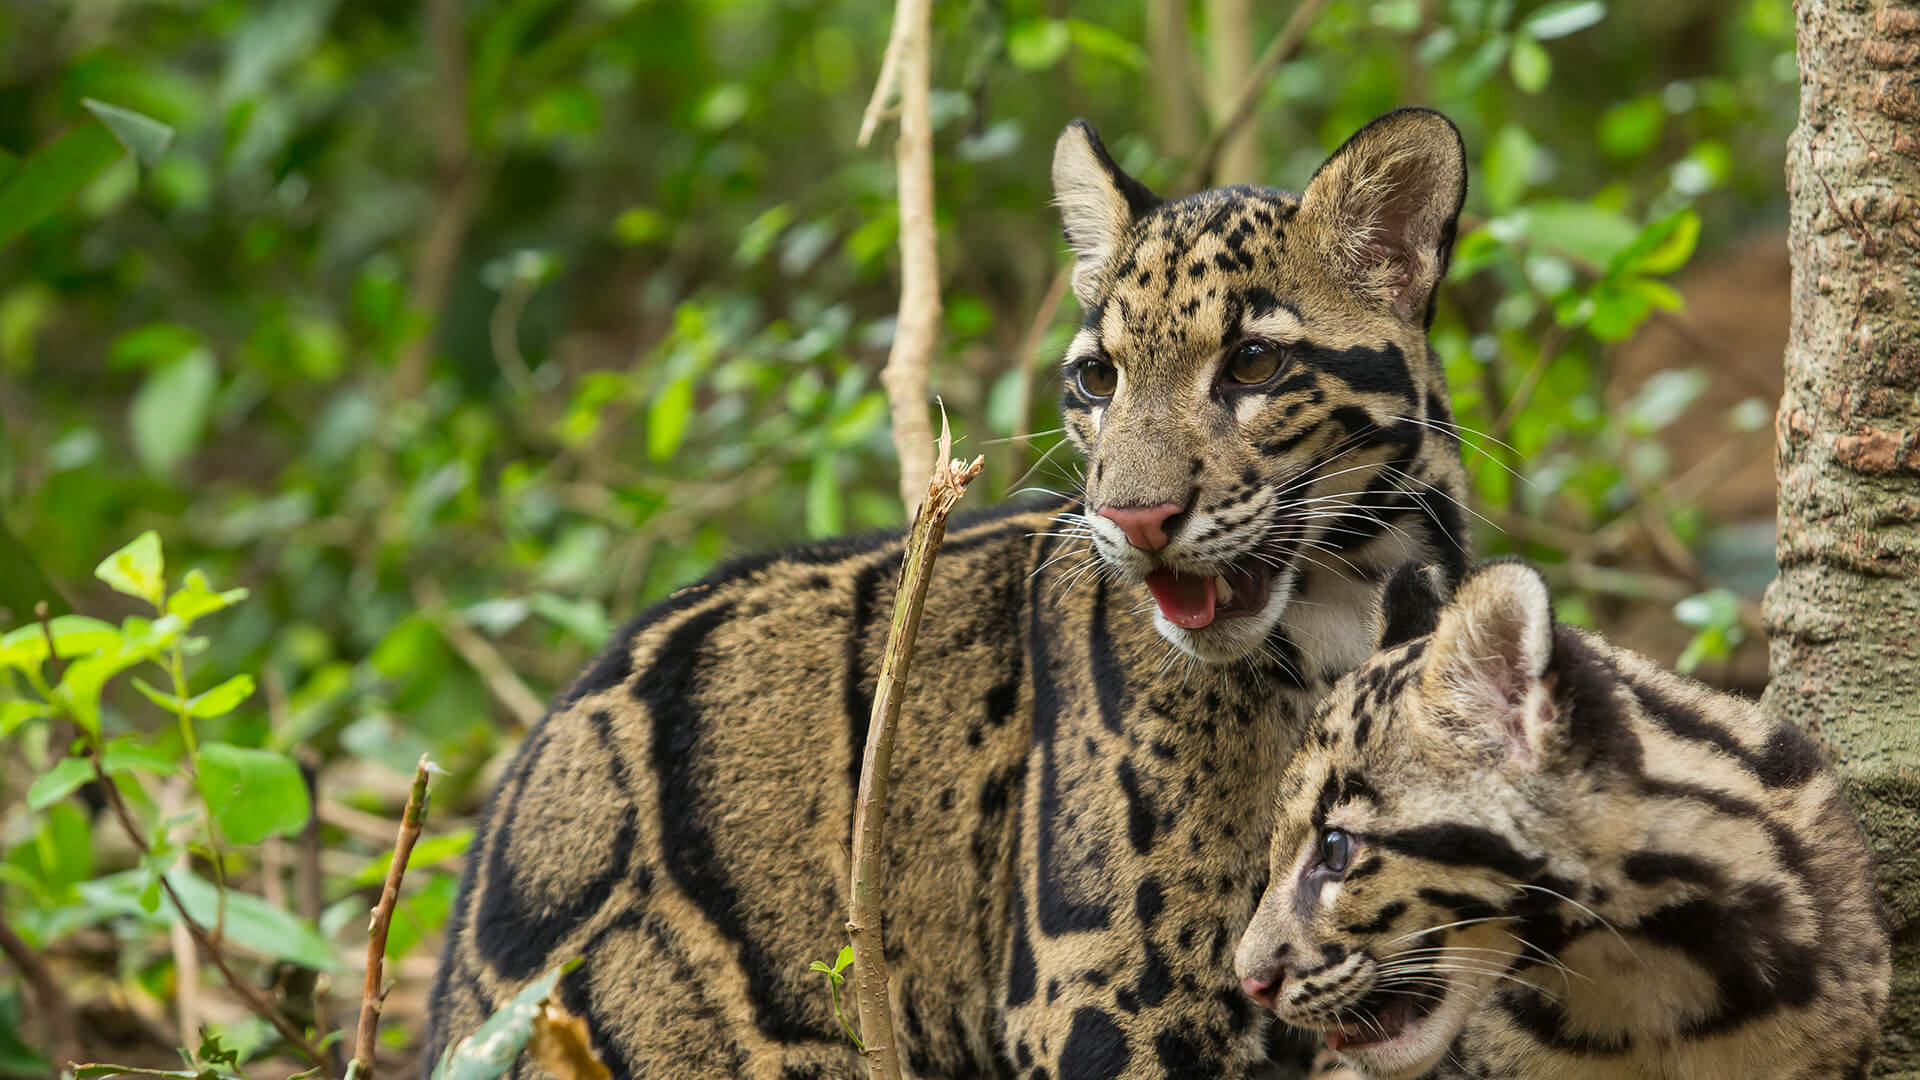 Clouded Leopard Arena Pile Top 10 Amazing Animals You Probably Didn’t Know About Them